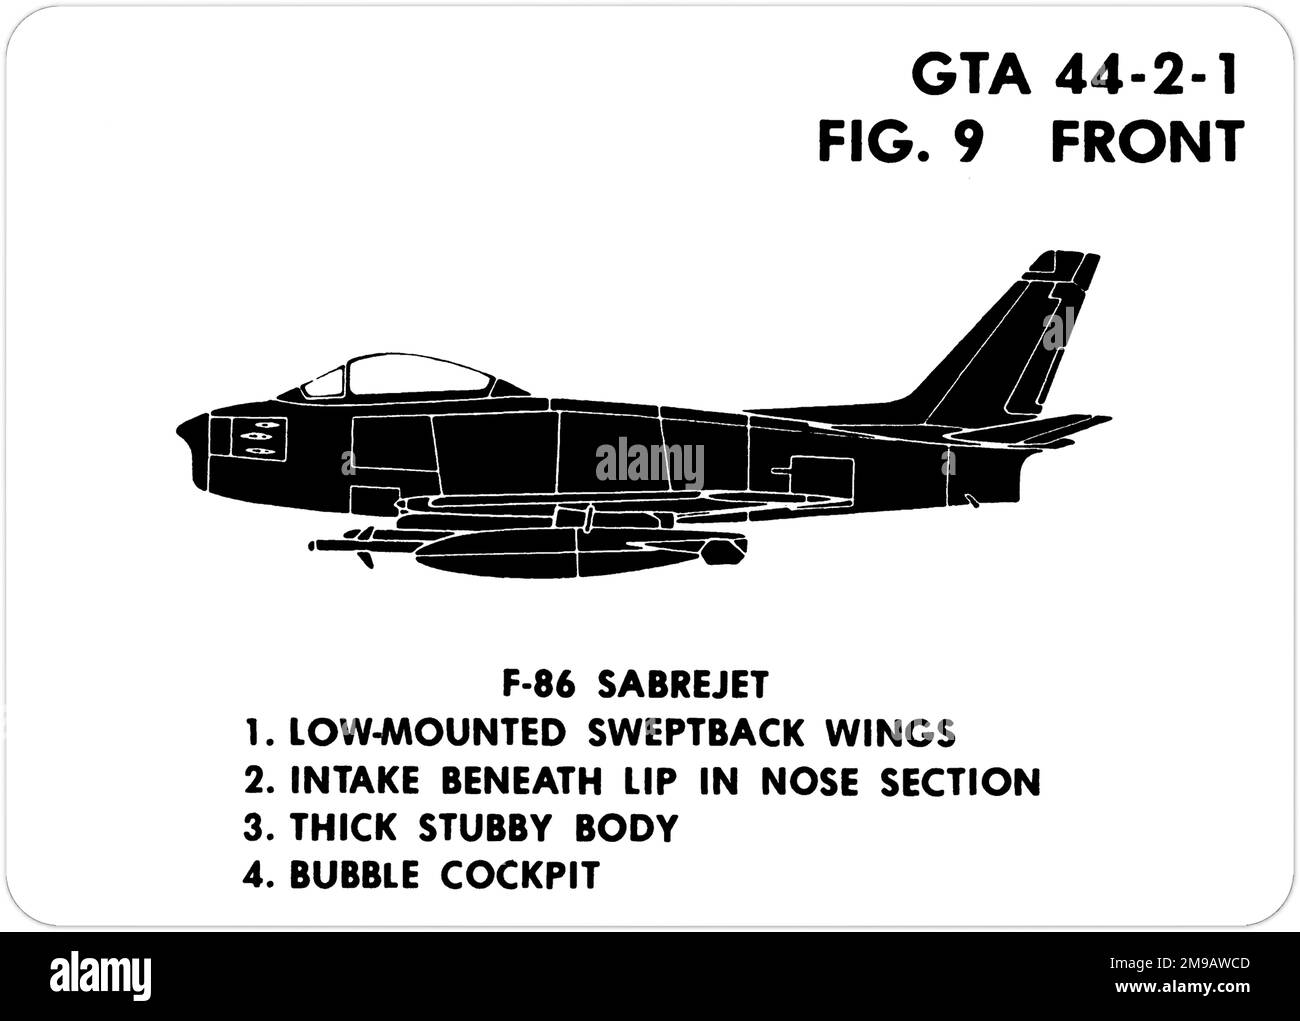 North American F-86F Sabre. This is one of the series of Graphics Training Aids (GTA) used by the United States Army to train their personnel to recognize friendly and hostile aircraft. This particular set, GTA 44-2-1, was issued in July1977. The set features aircraft from: Canada, Italy, United Kingdom, United States, and the USSR. Stock Photo